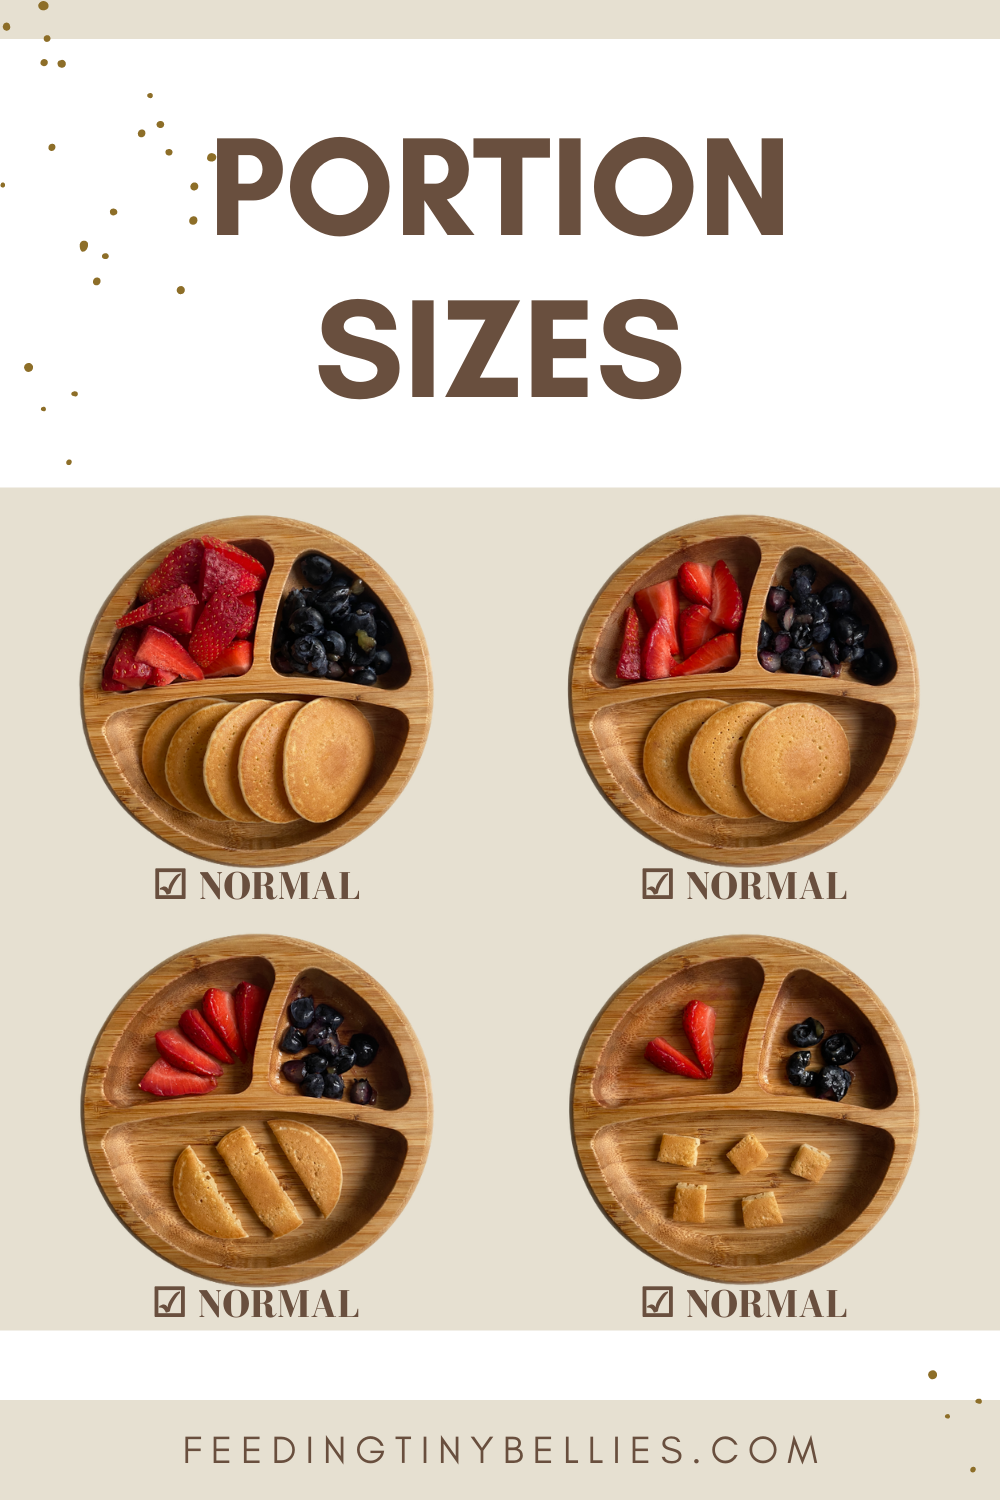 Portion sizes - different portions sizes can all be normal.